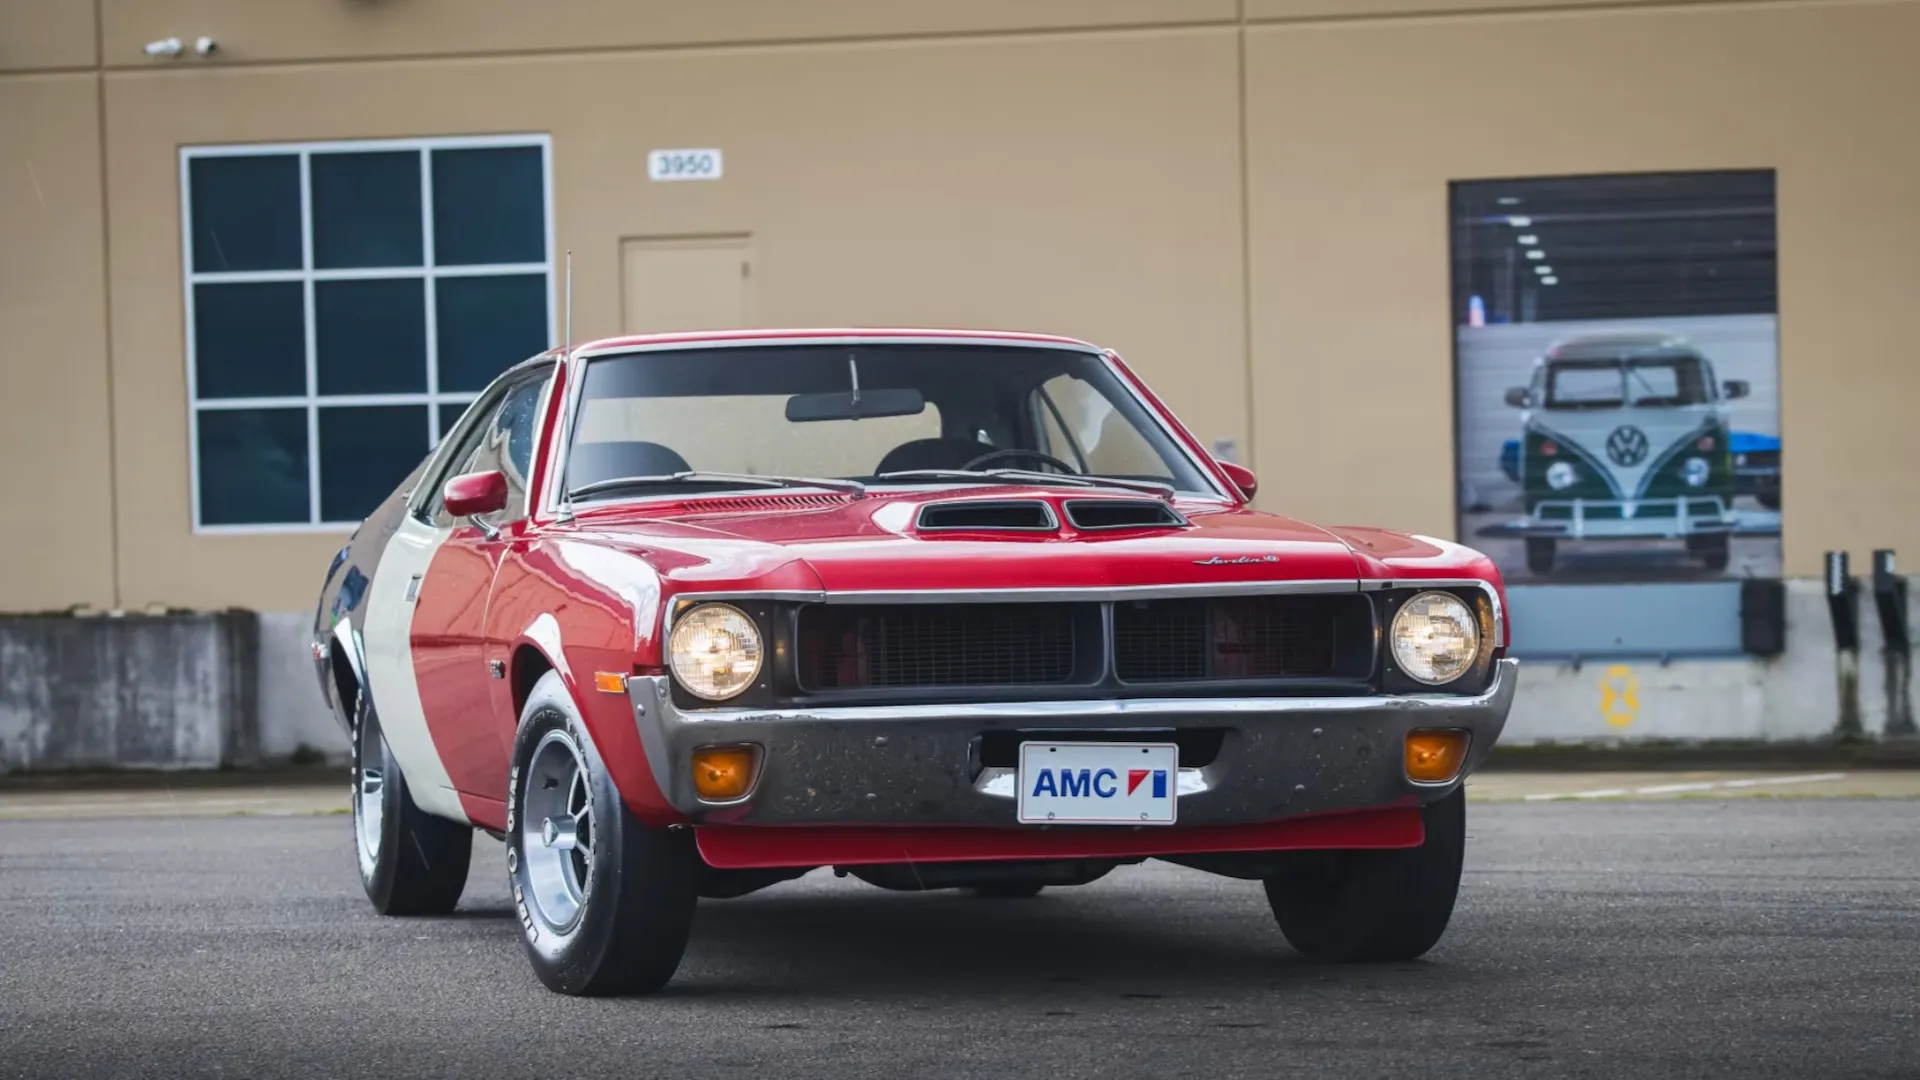 1970 AMC Javelin SST Trans Am Edition heads to auction